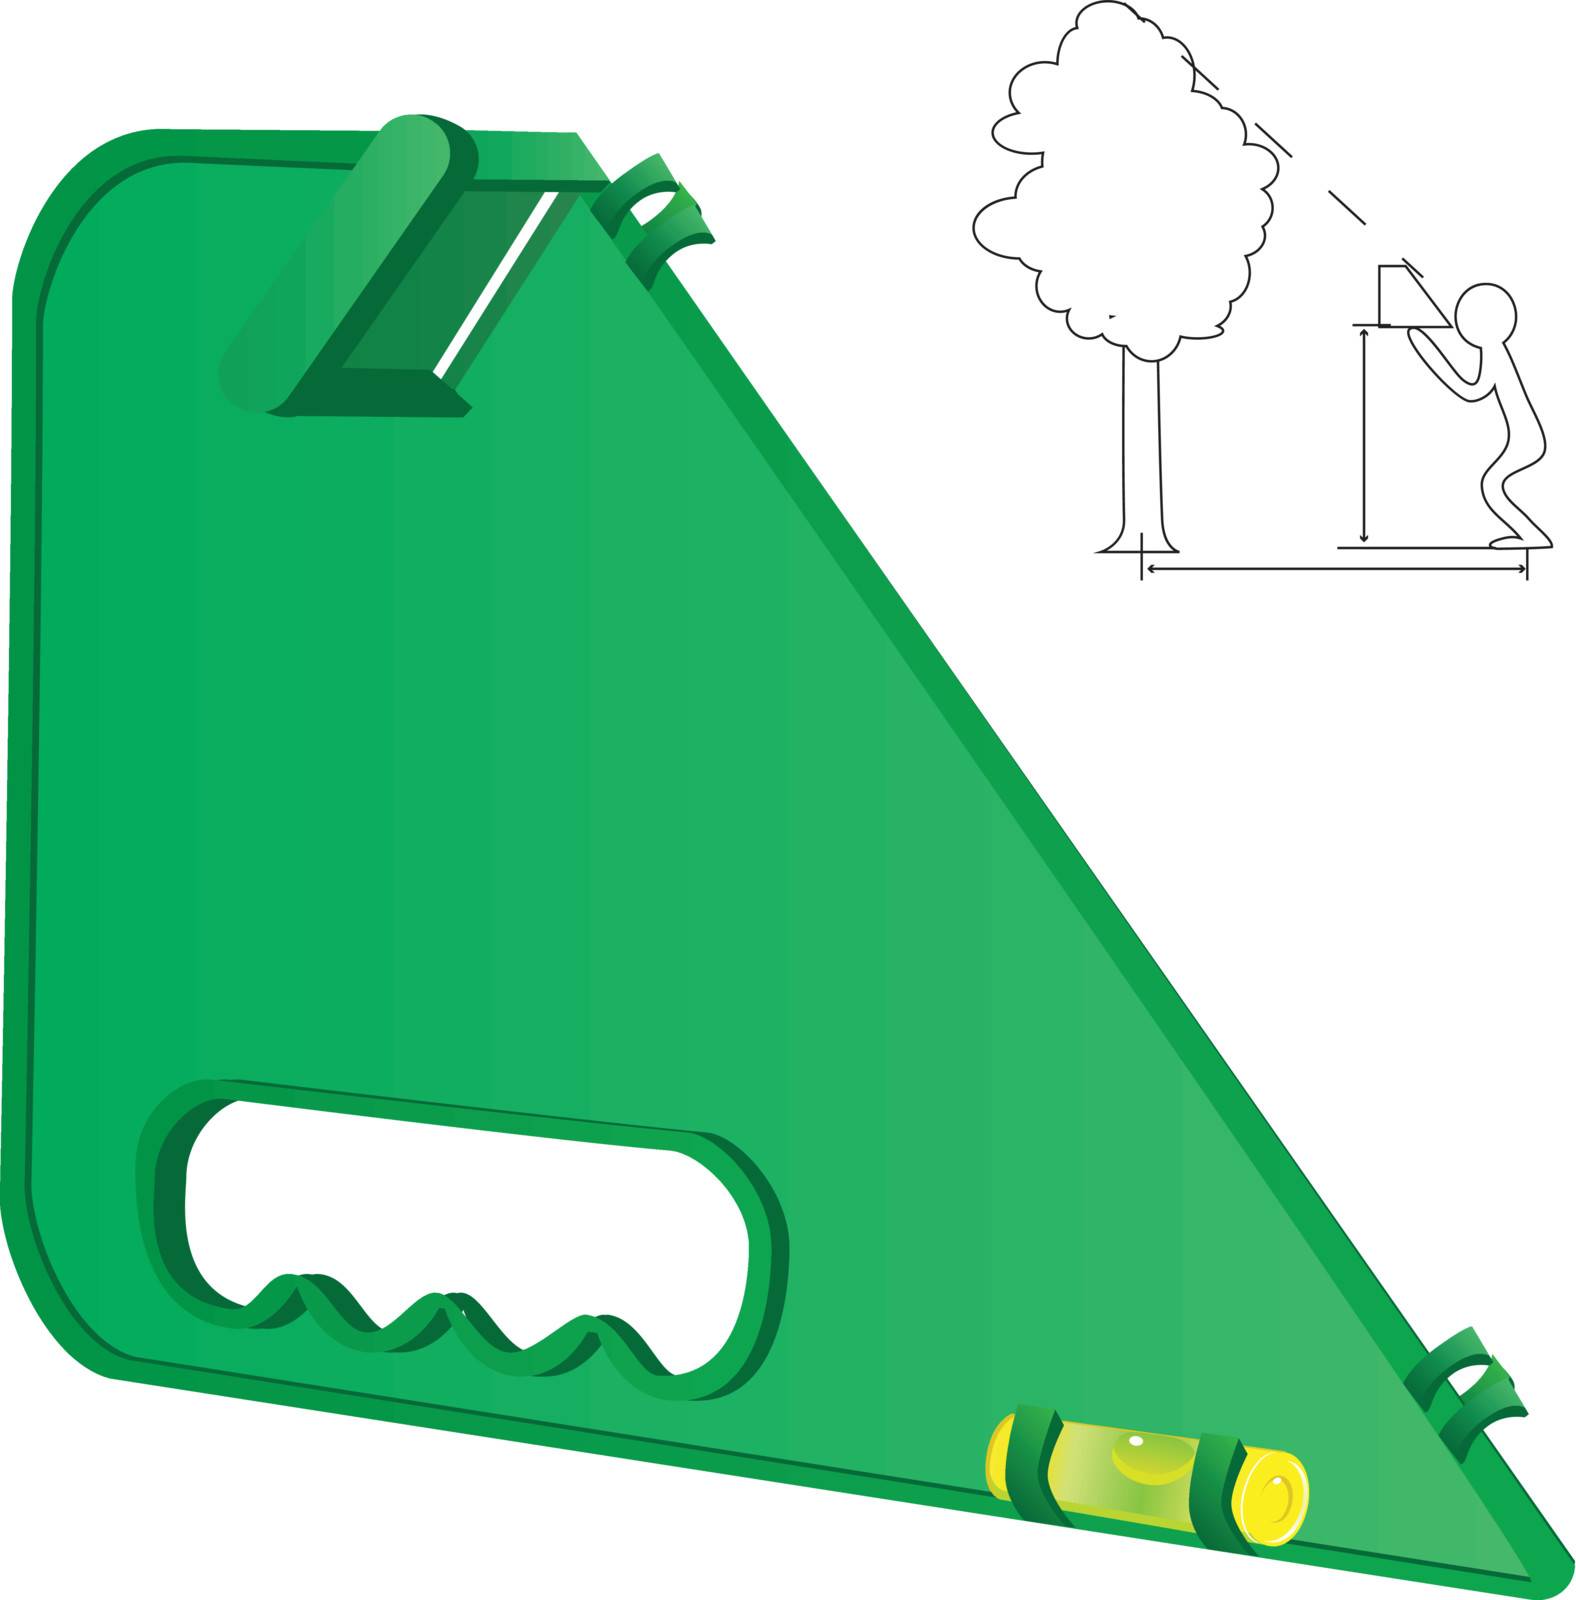 Equipment for measuring the height of the tree. Vector illustration.